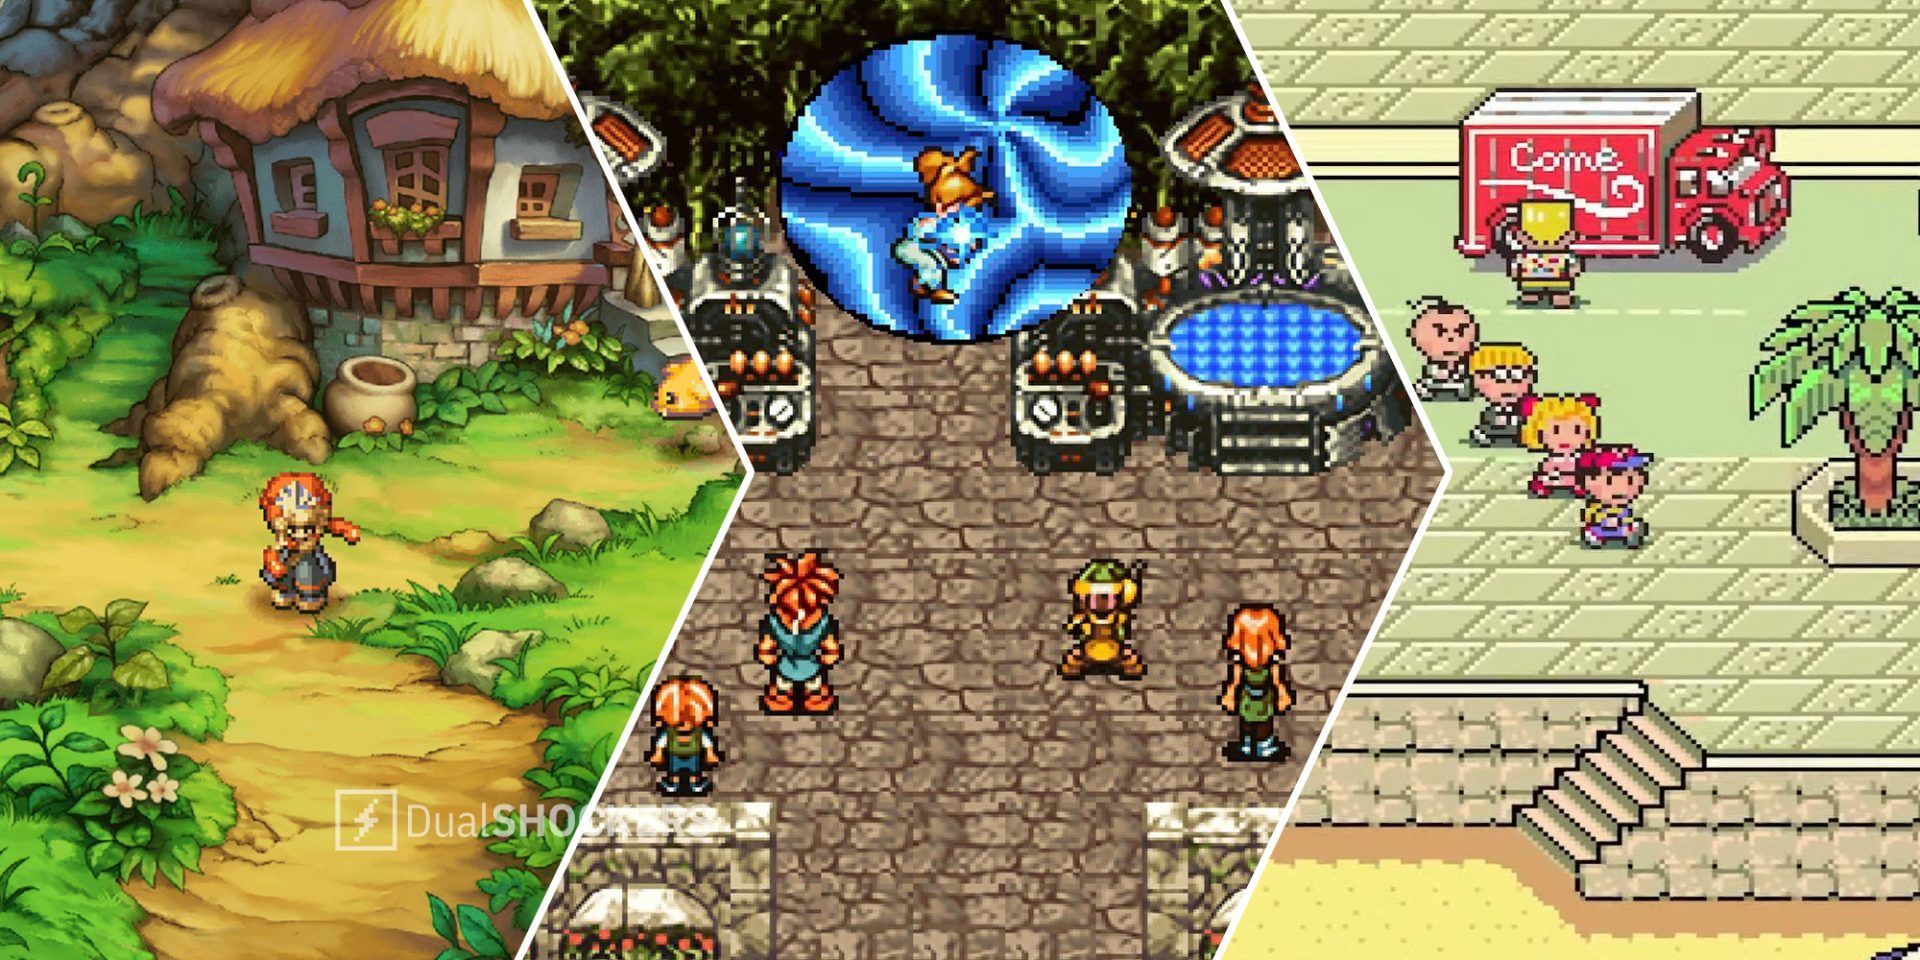 Legend of Mana on left, Chrono Trigger in middle, Earthbound on right